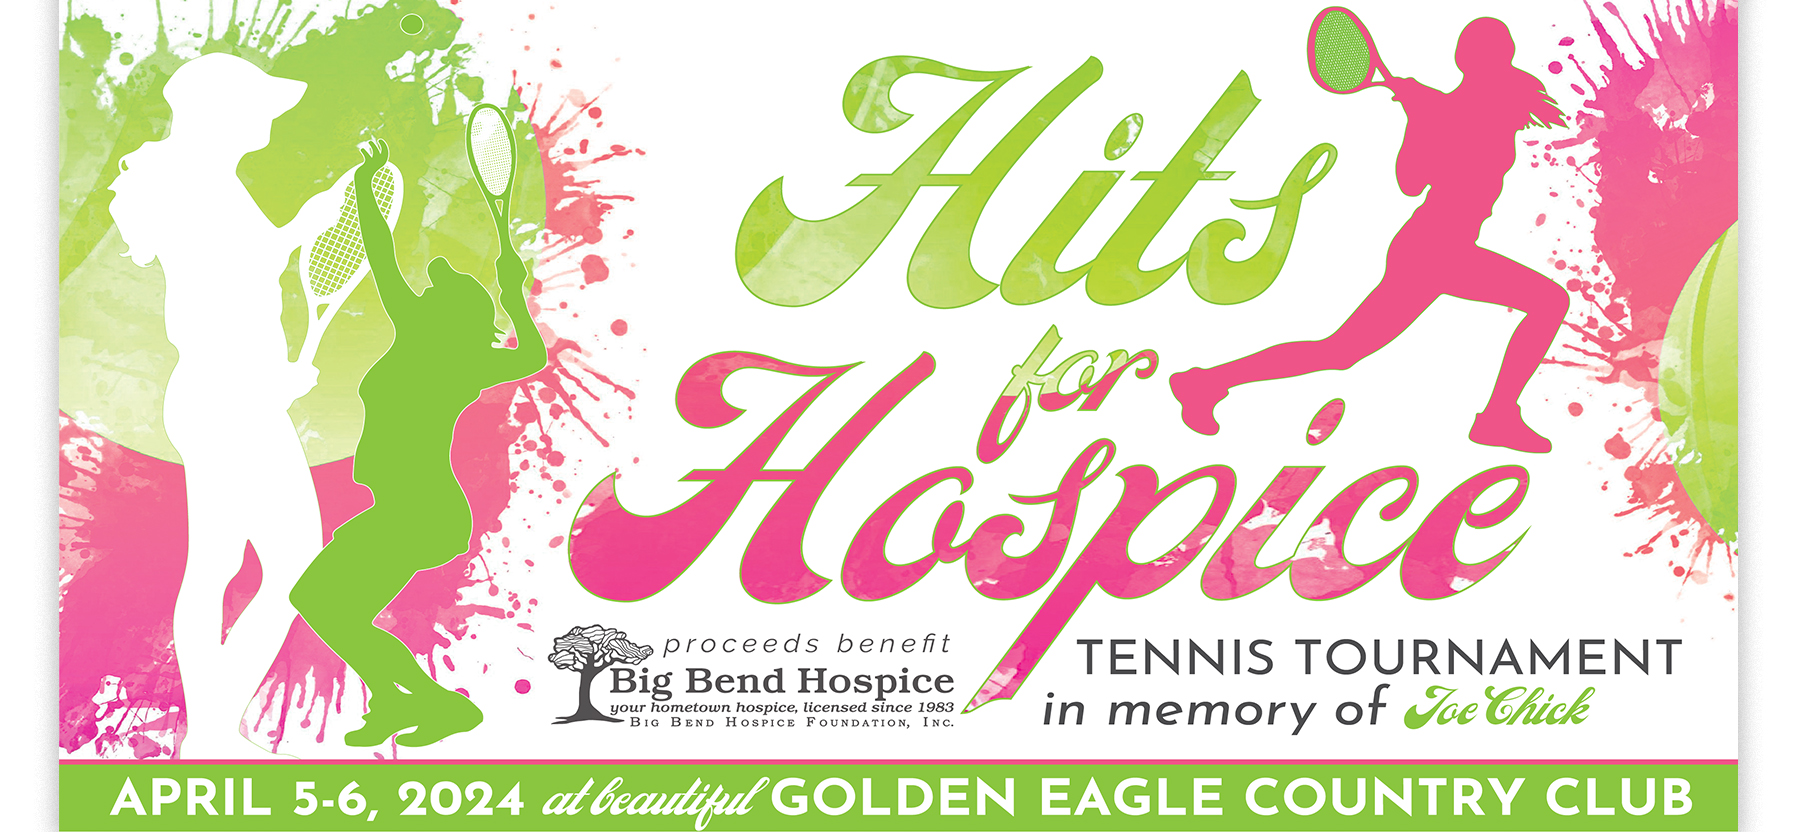 Hits for Hospice Tennis Tournament Logo with tennis player